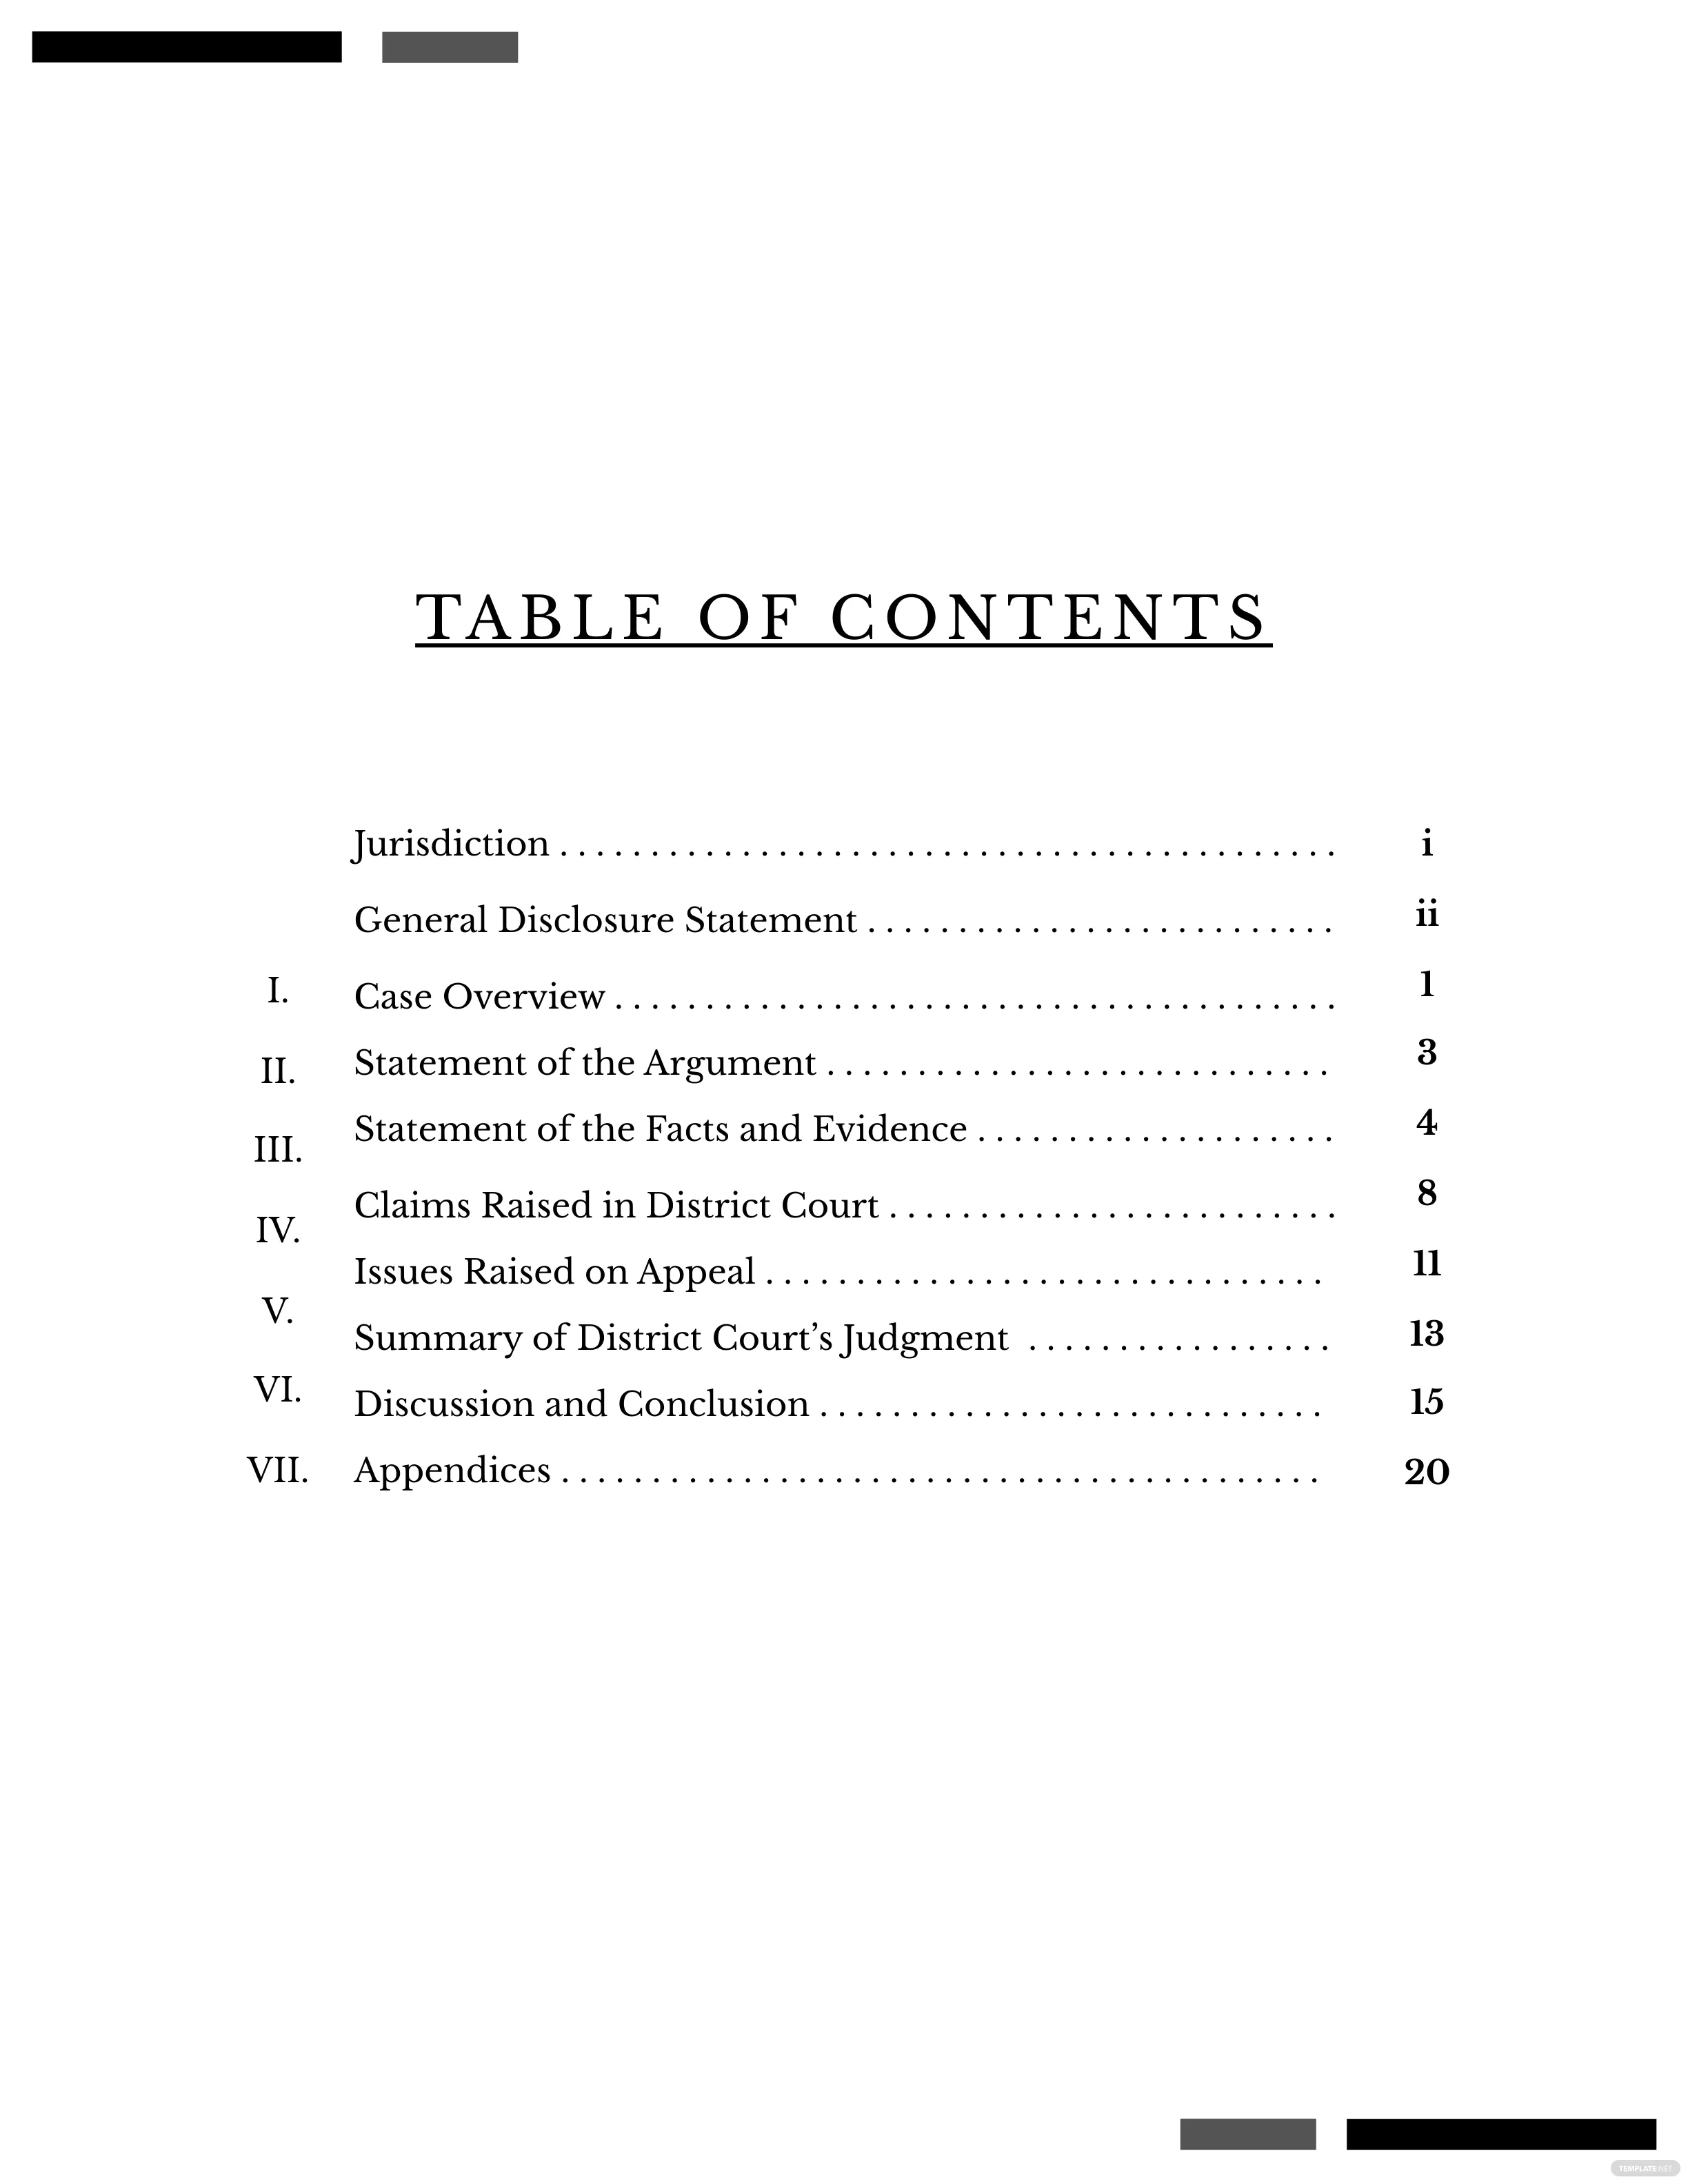 FREE 20+ Table of Content Templates in MS Word